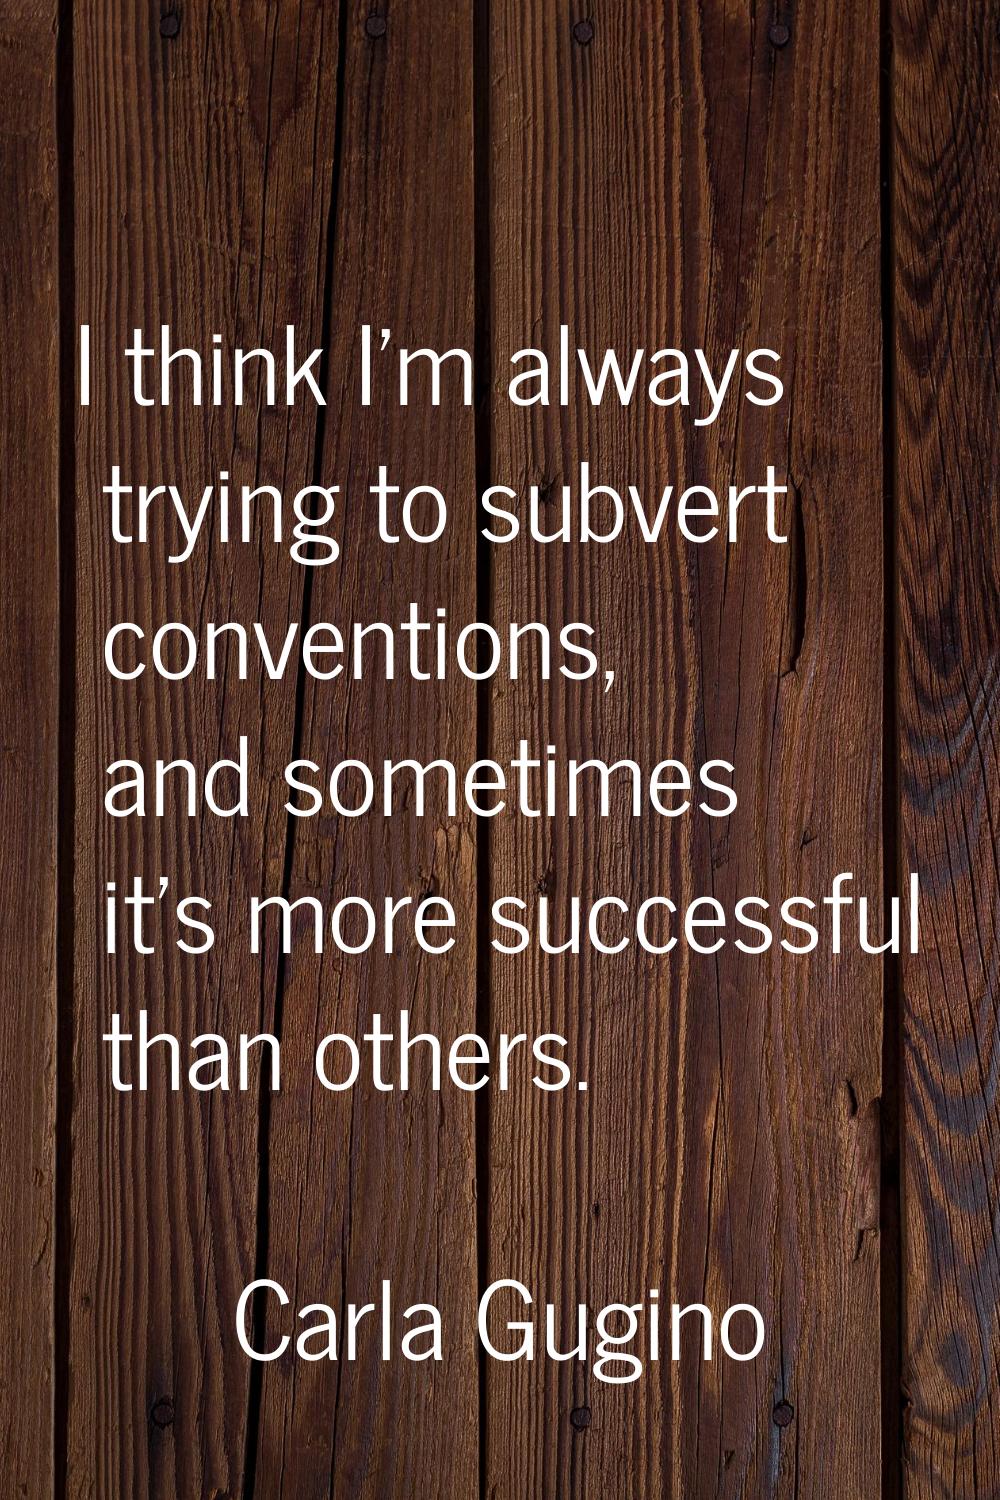 I think I'm always trying to subvert conventions, and sometimes it's more successful than others.